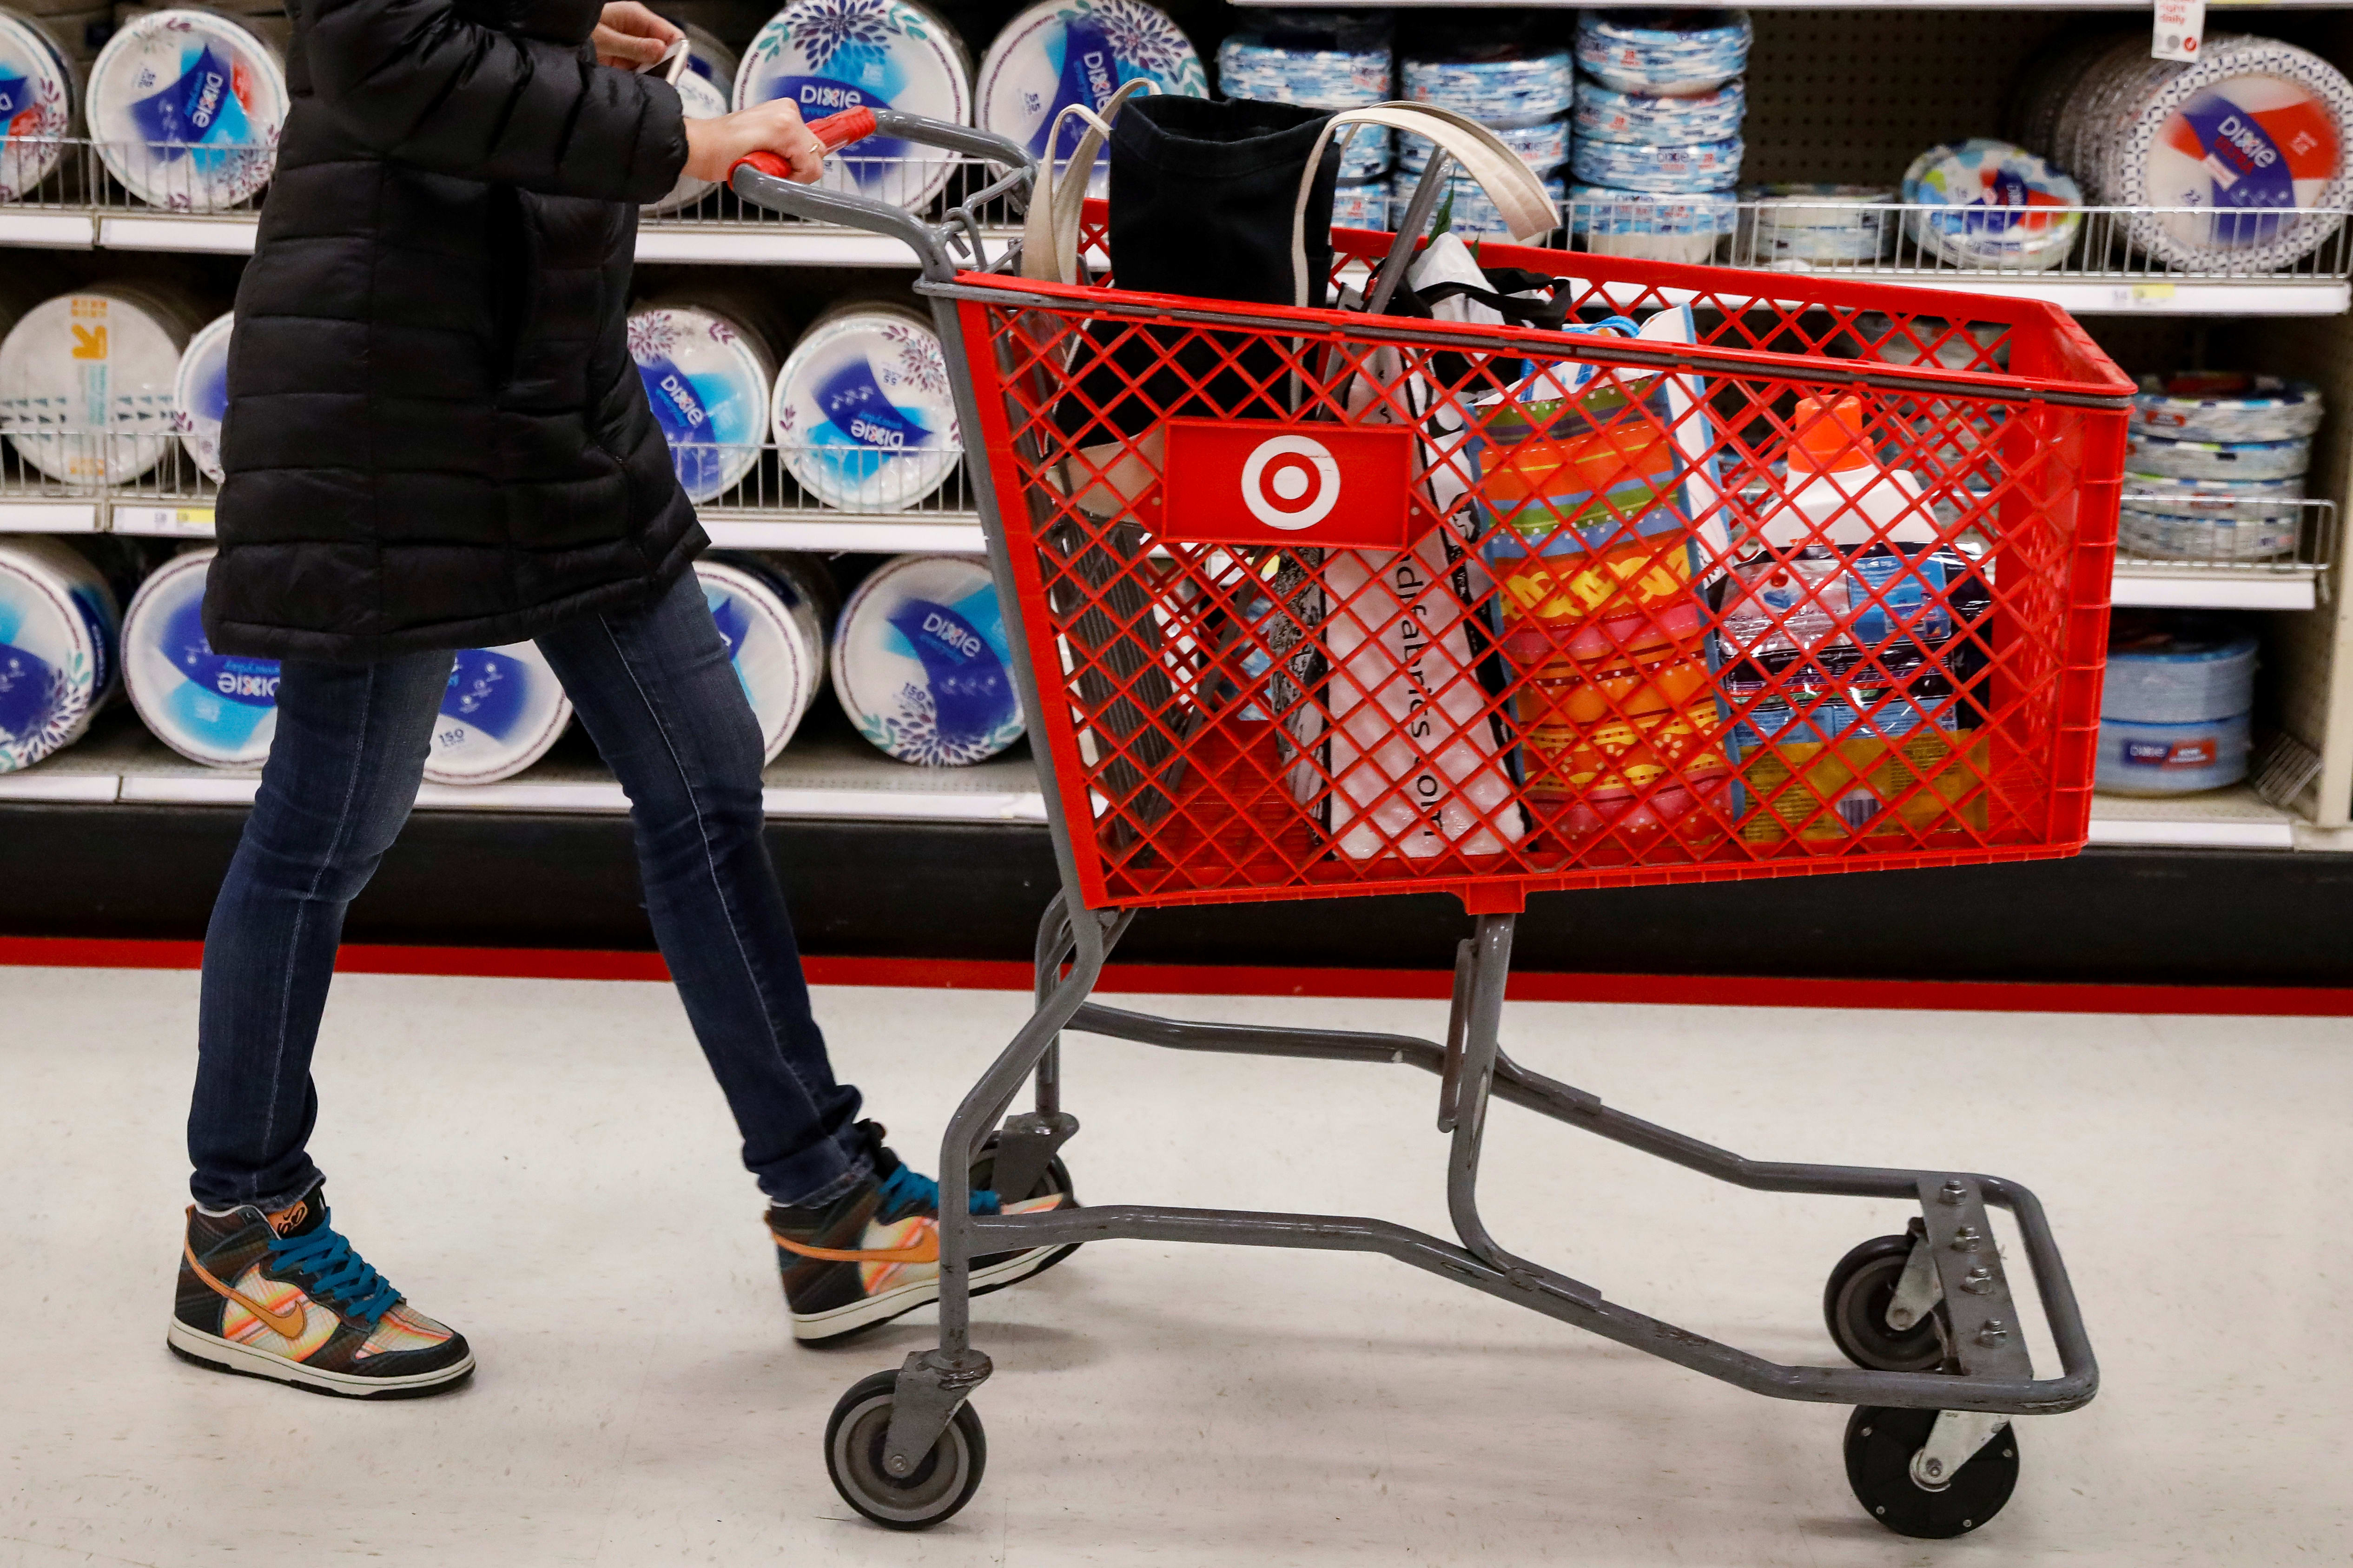 Target set to roll out its revamped loyalty program nationwide